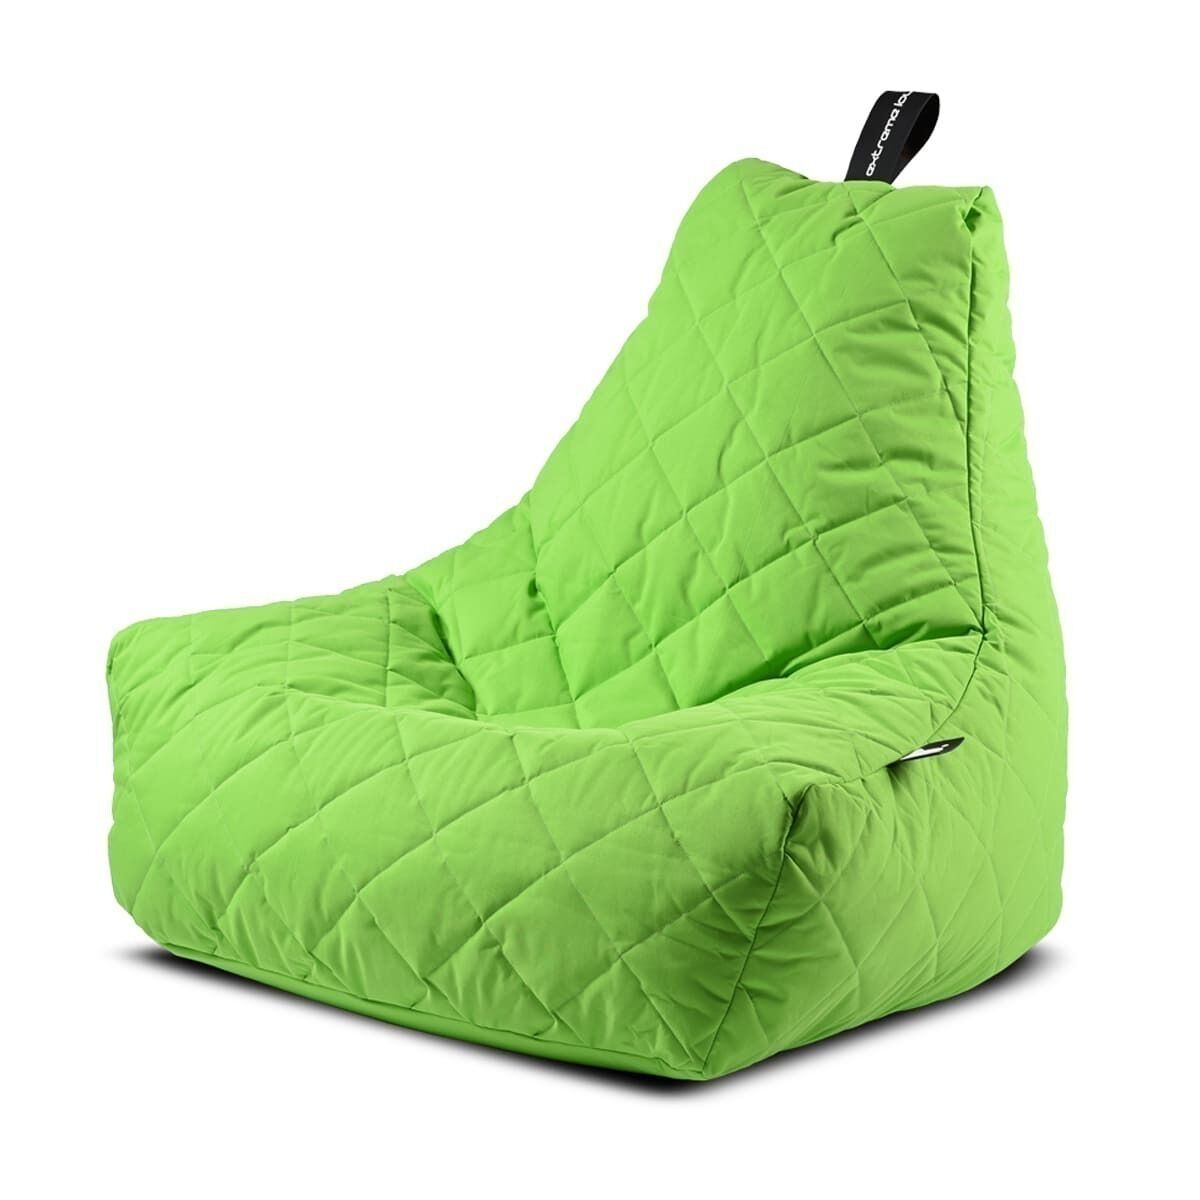 Extreme Lounging - Mighty Quilted Bean Bag - Lime product image